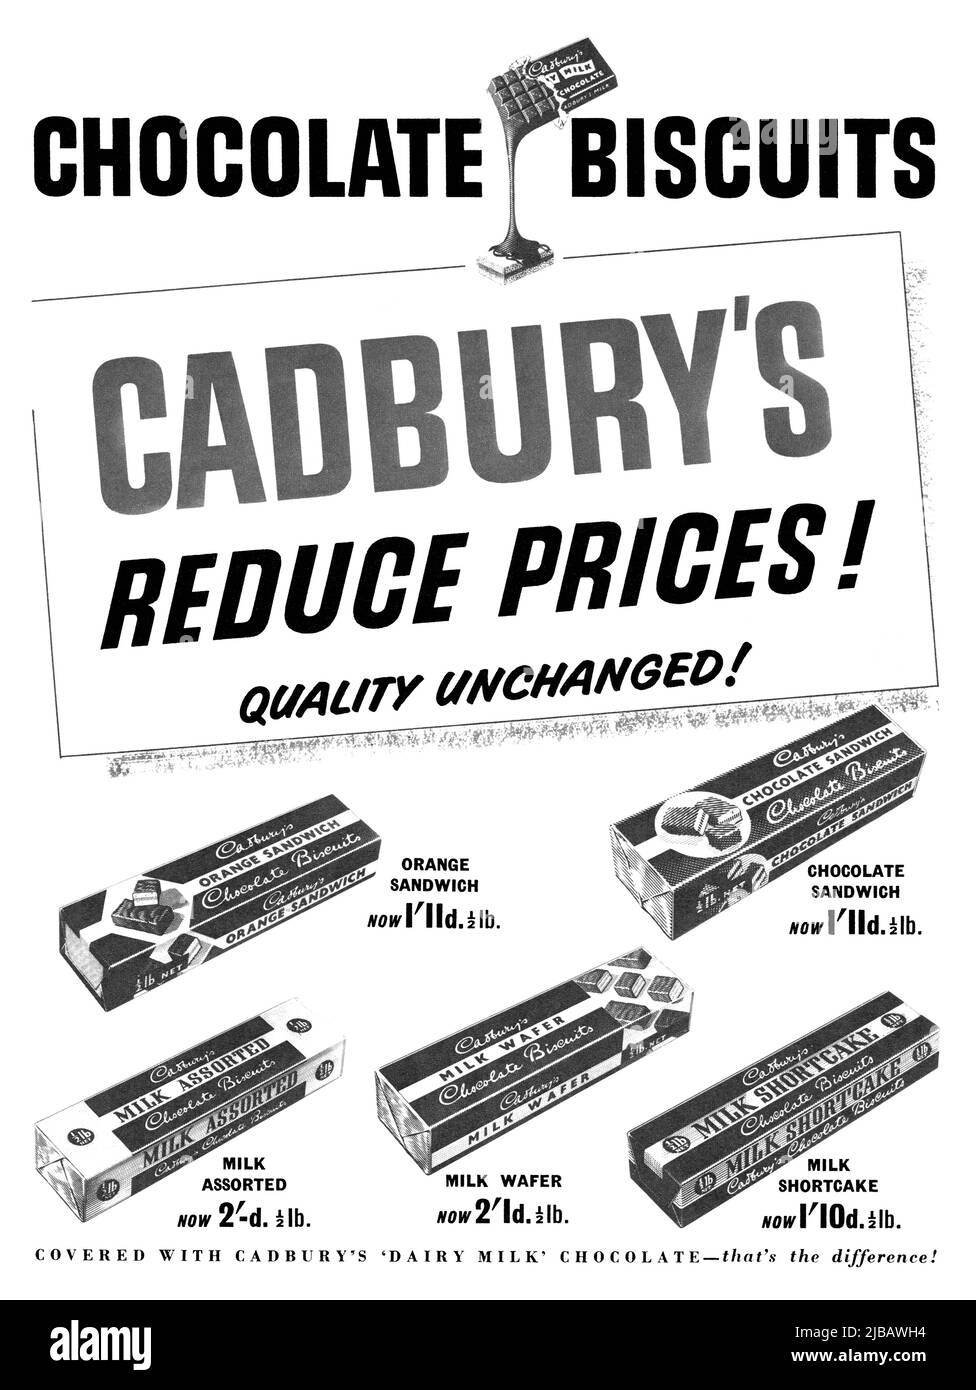 1955 British advertisement for Cadbury's Chocolate Biscuits at reduced prices. Stock Photo